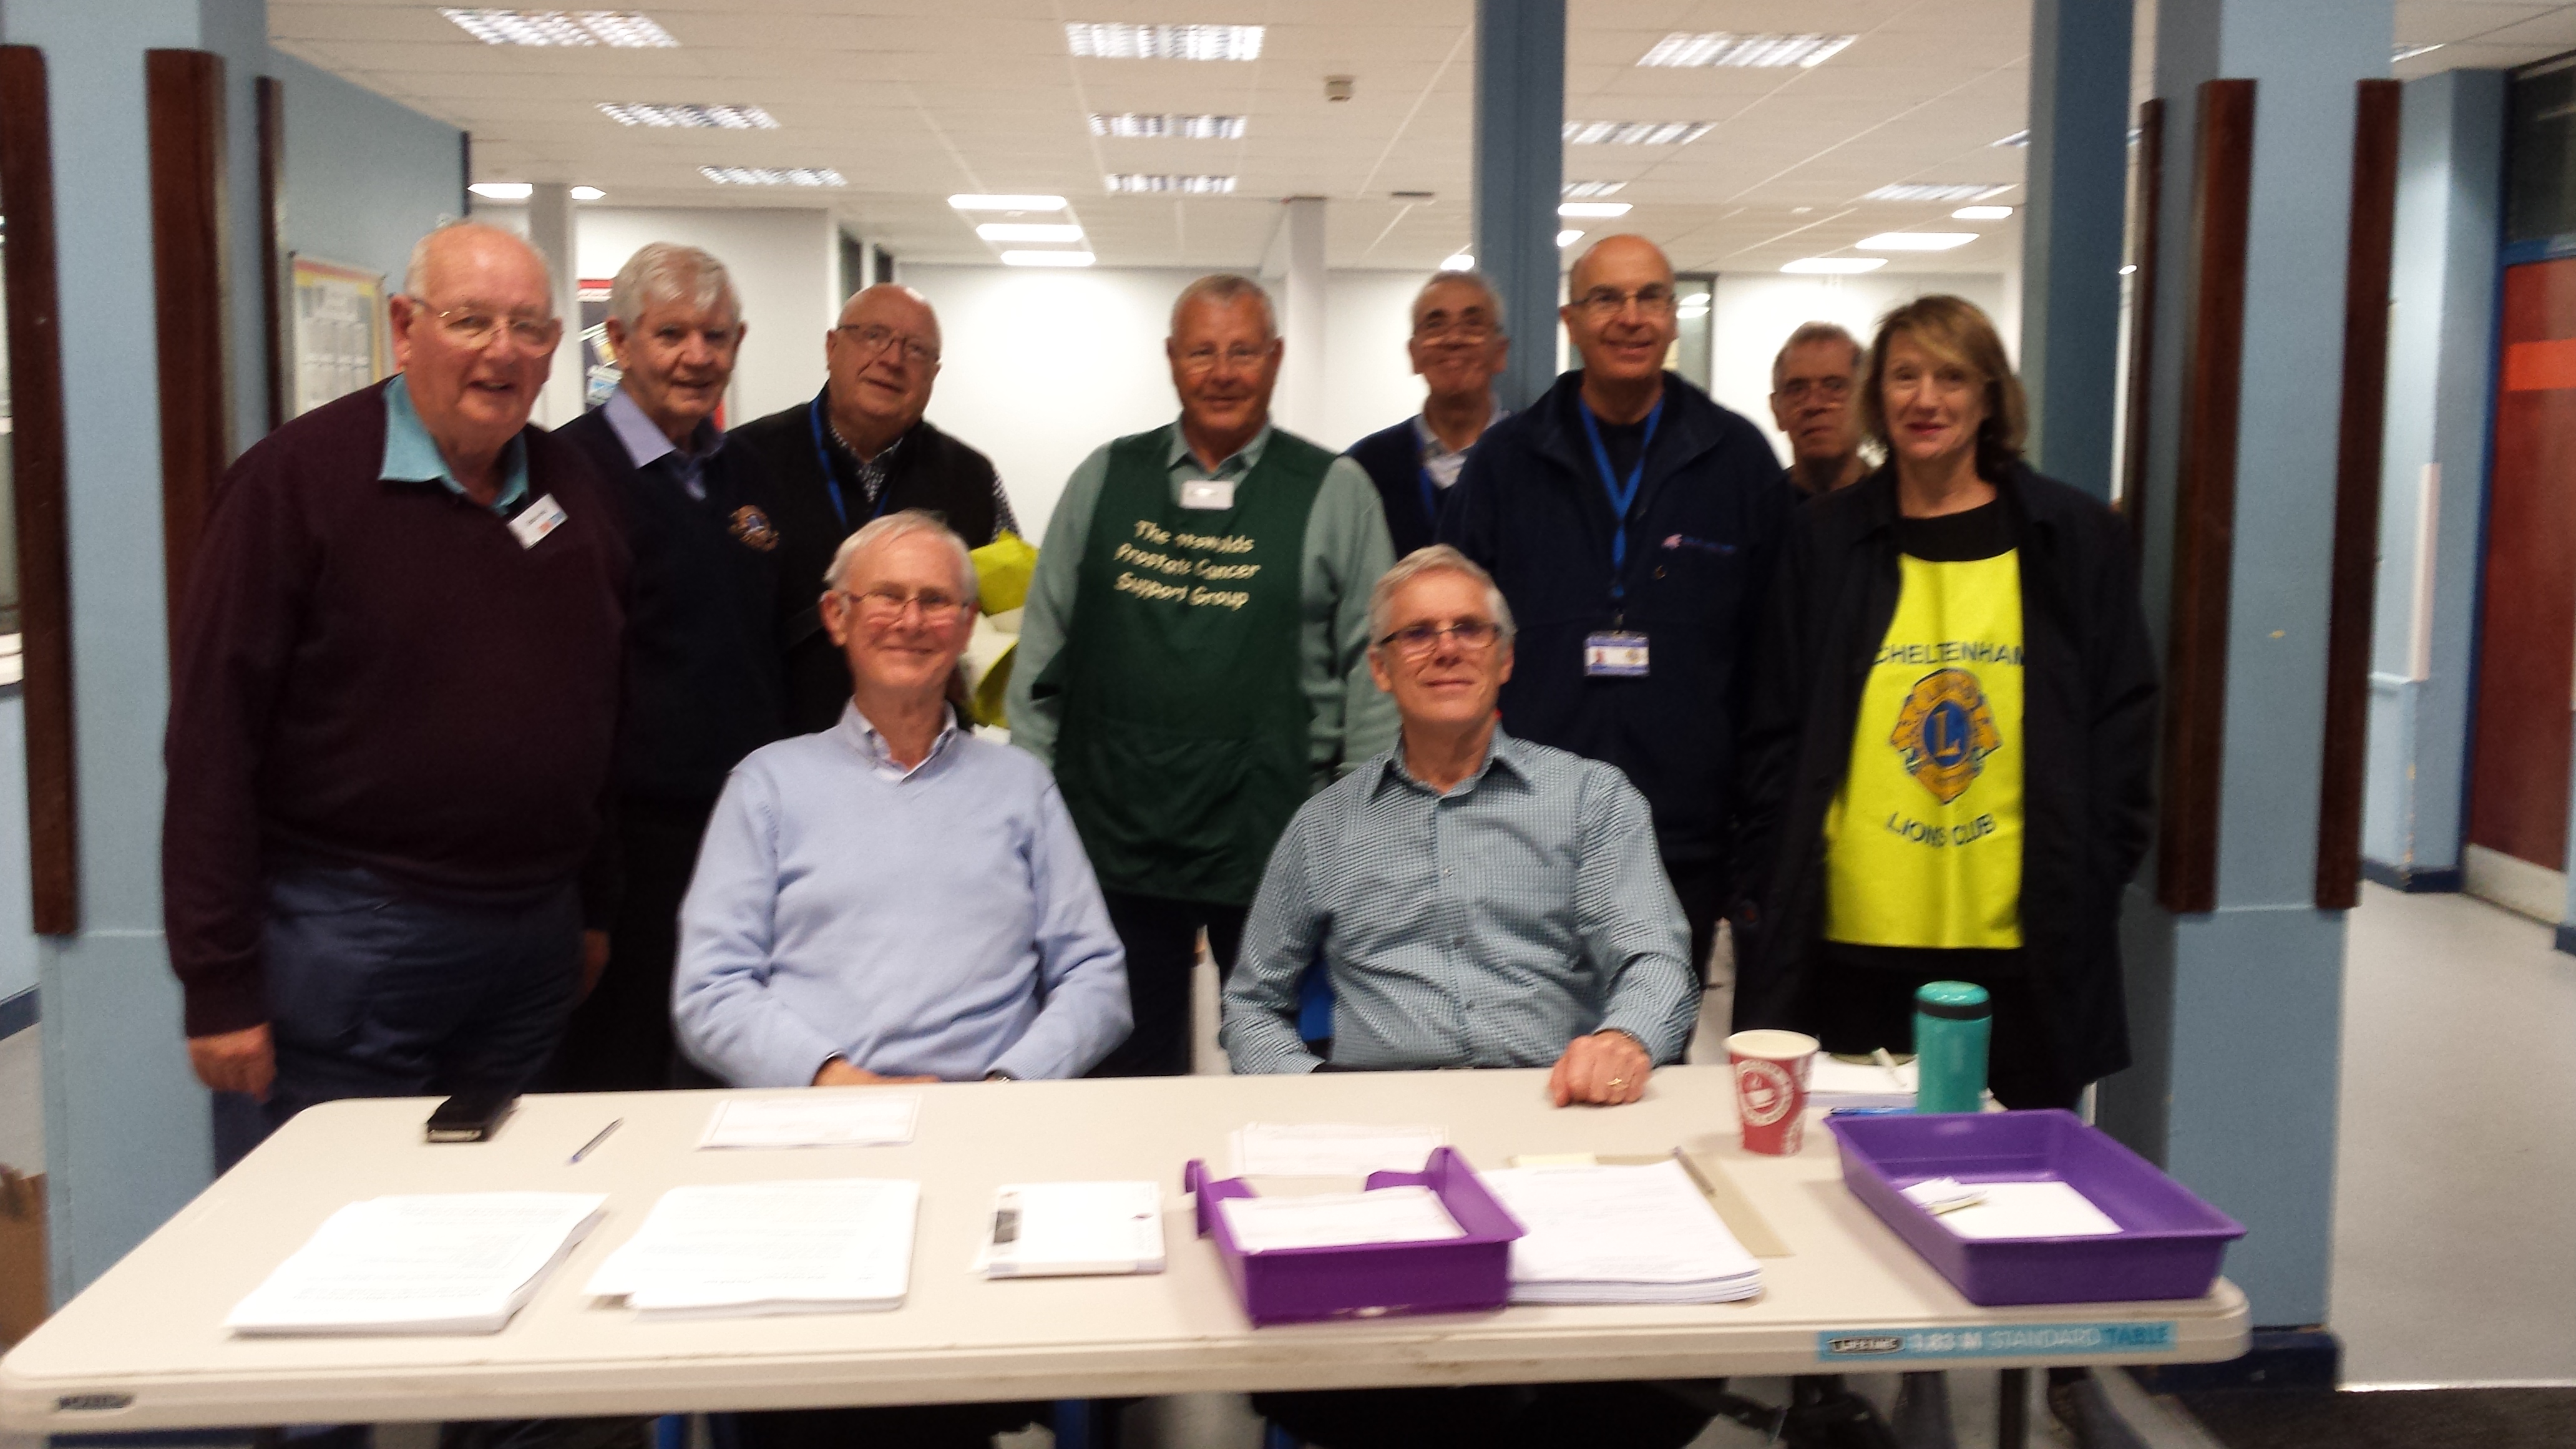 CPCSG volunteers  and Cheltenham and Gloucester Lions